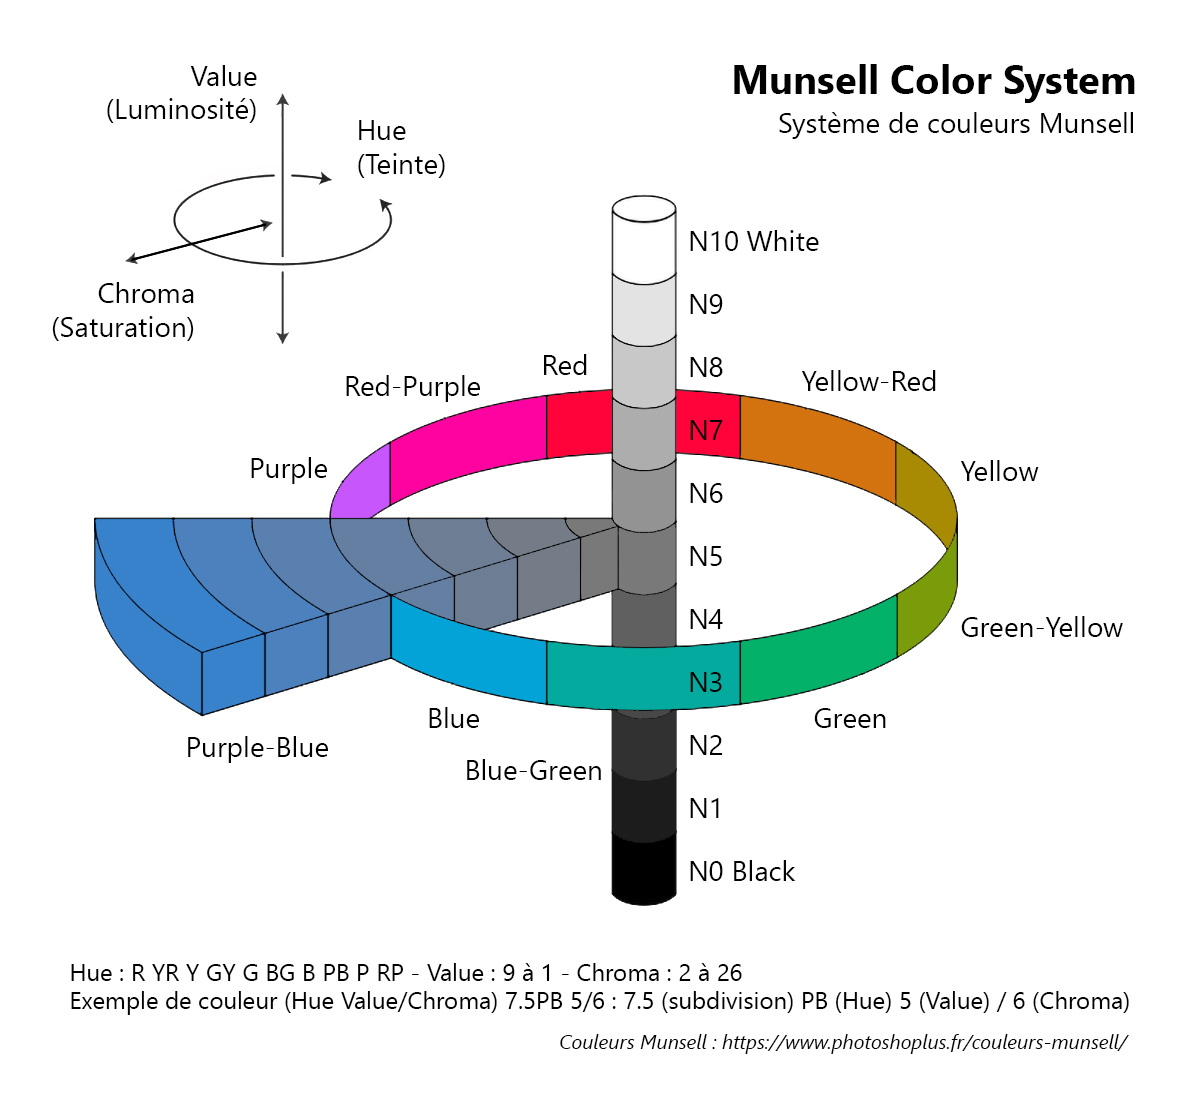 Système de couleurs Munsell (Munsell Color System)